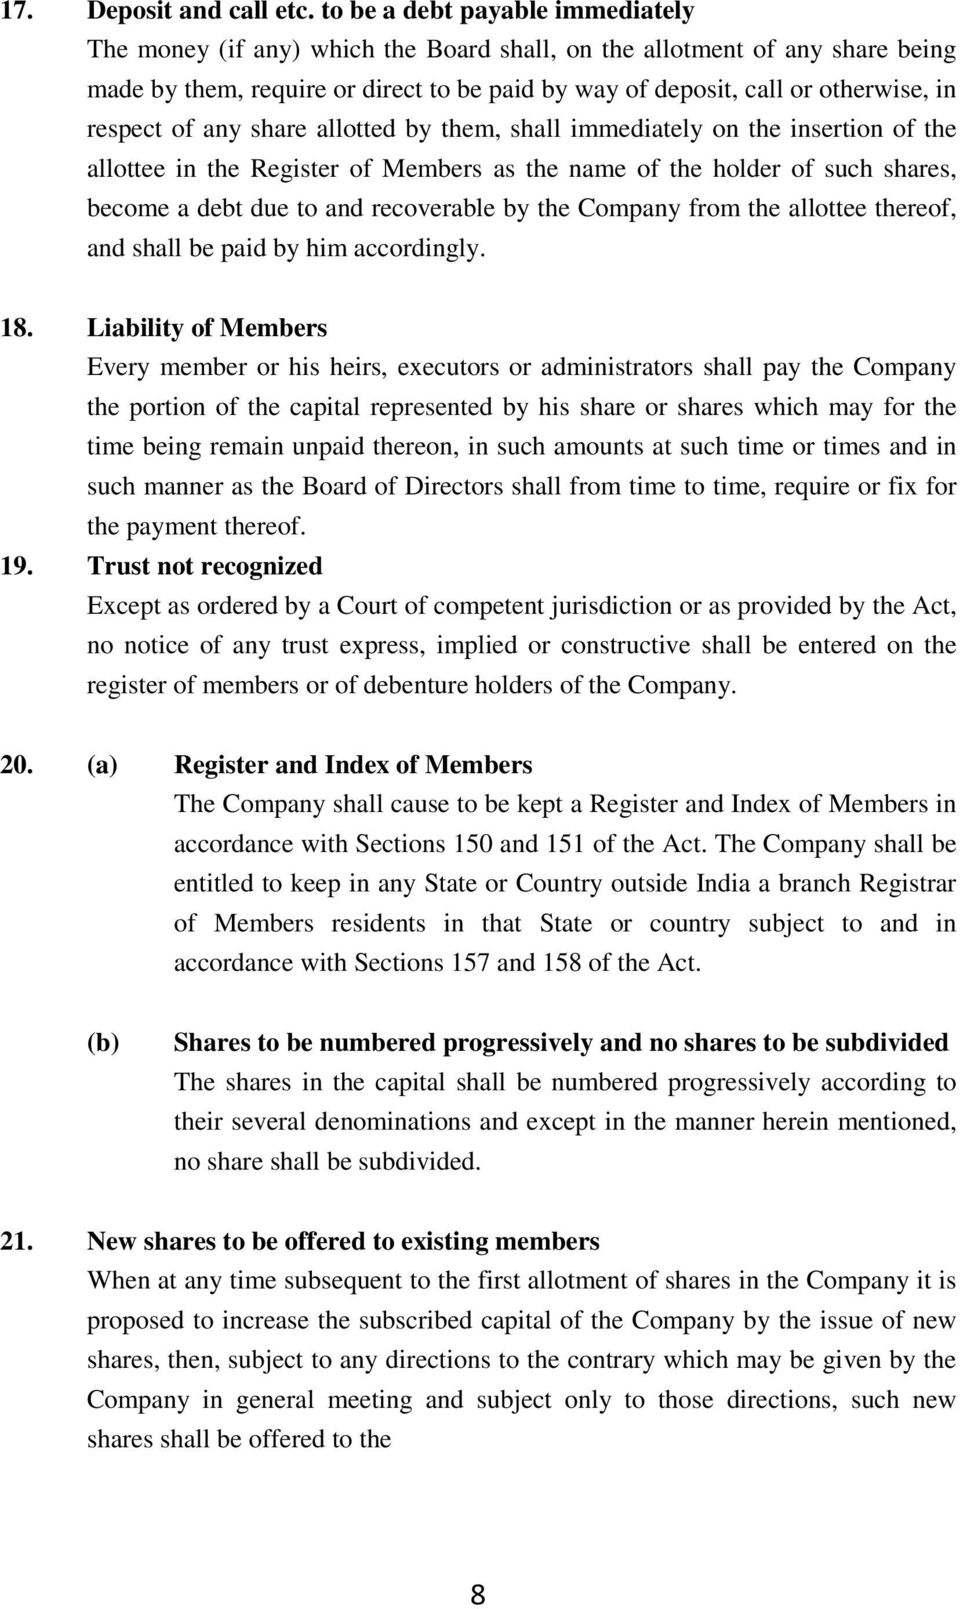 respect of any share allotted by them, shall immediately on the insertion of the allottee in the Register of Members as the name of the holder of such shares, become a debt due to and recoverable by